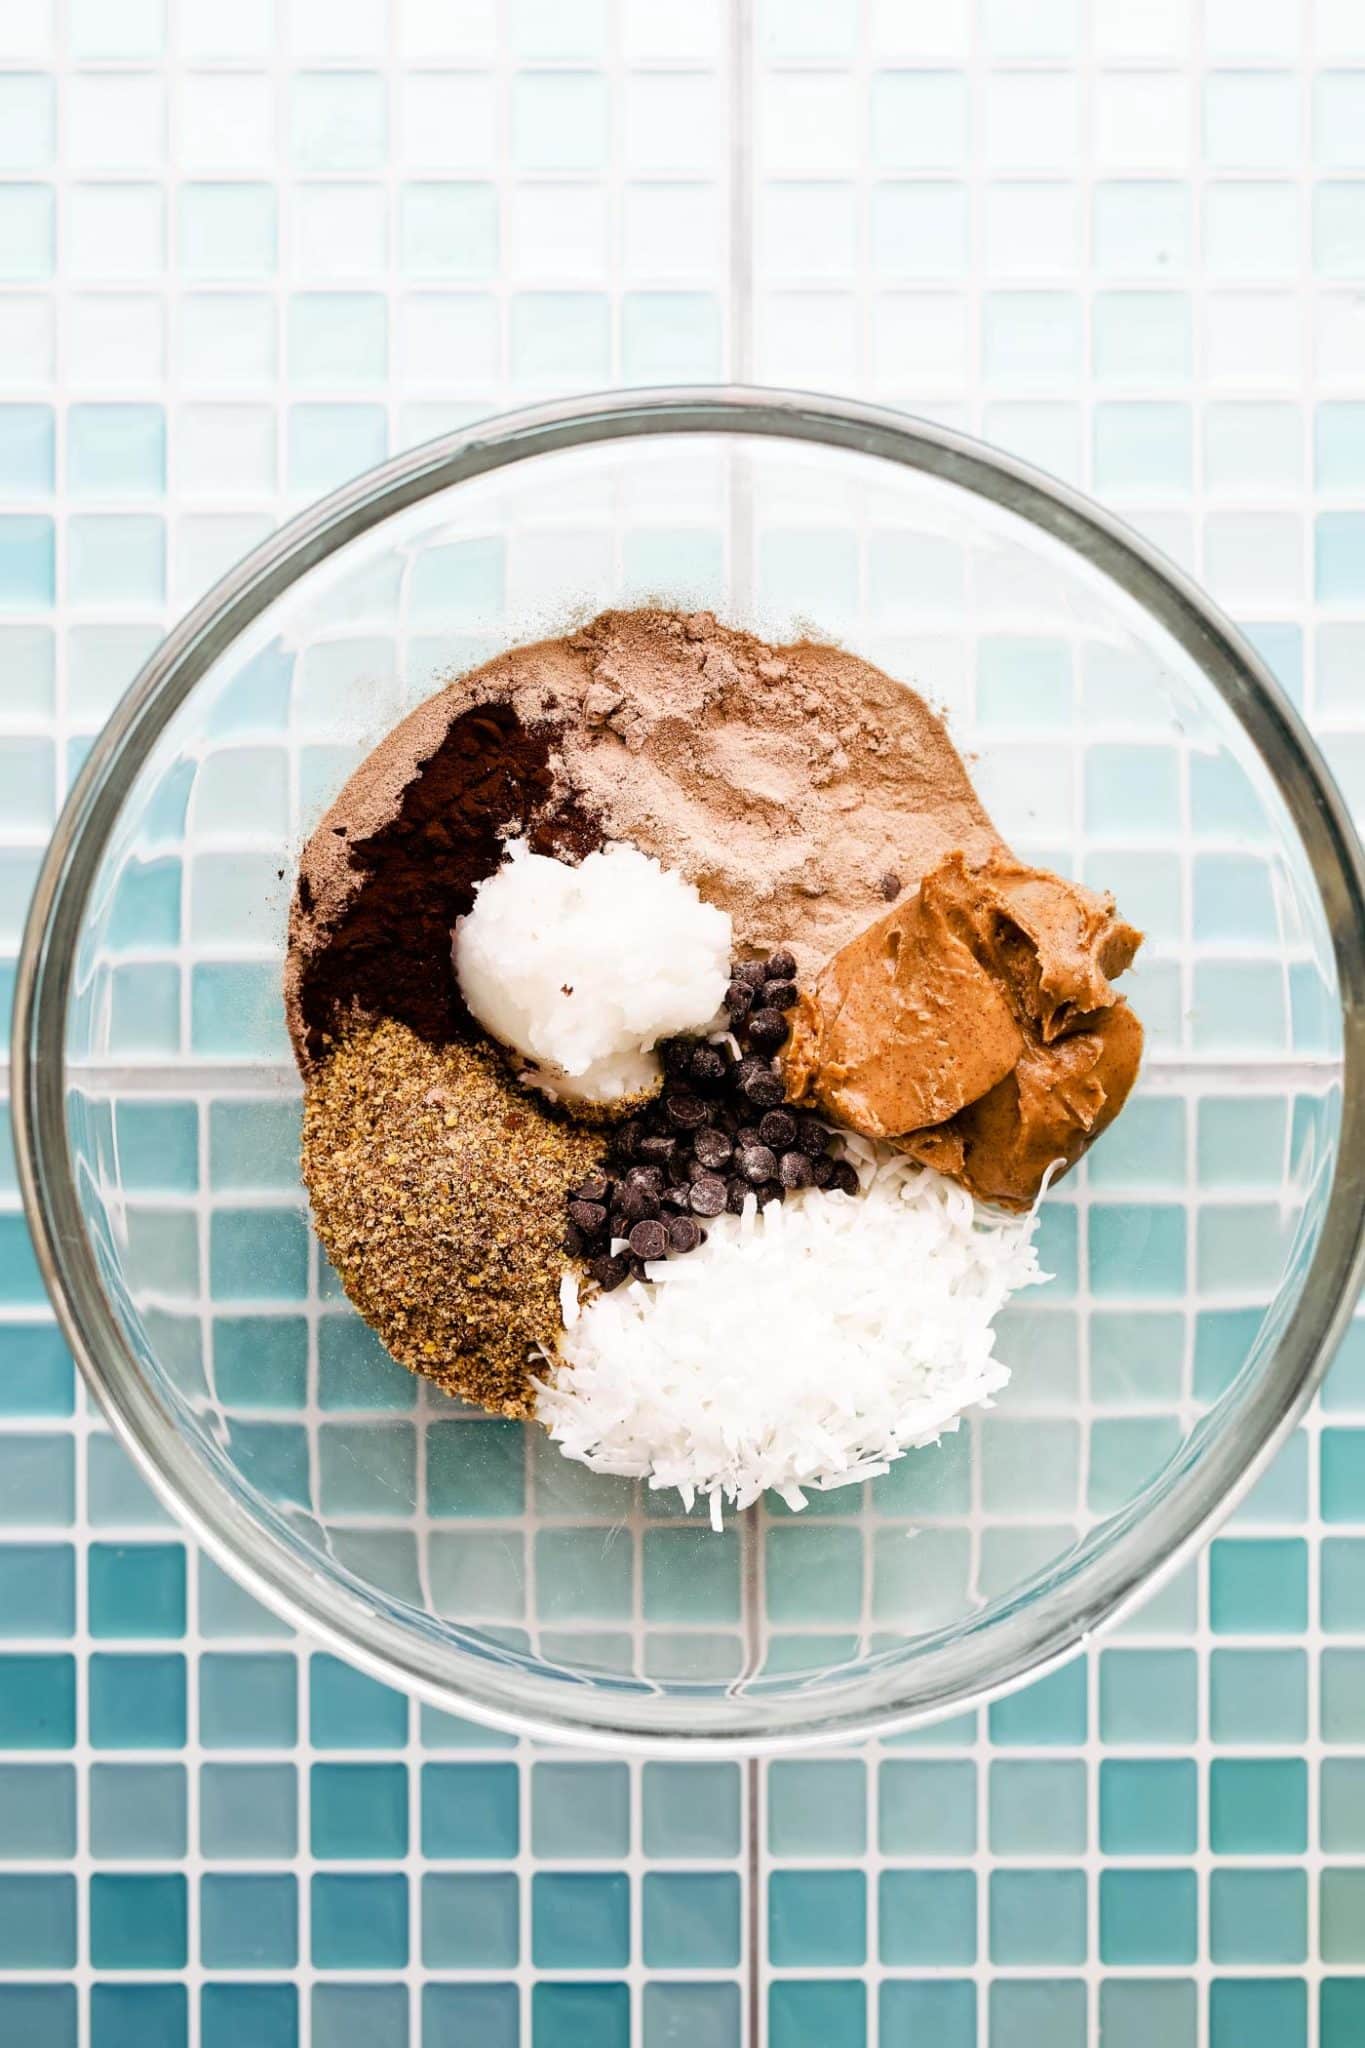 cocoa powder, protein powder, flax meal, nut butter, coconut oil, chocolate chips, and coconut flakes in a glass bowl